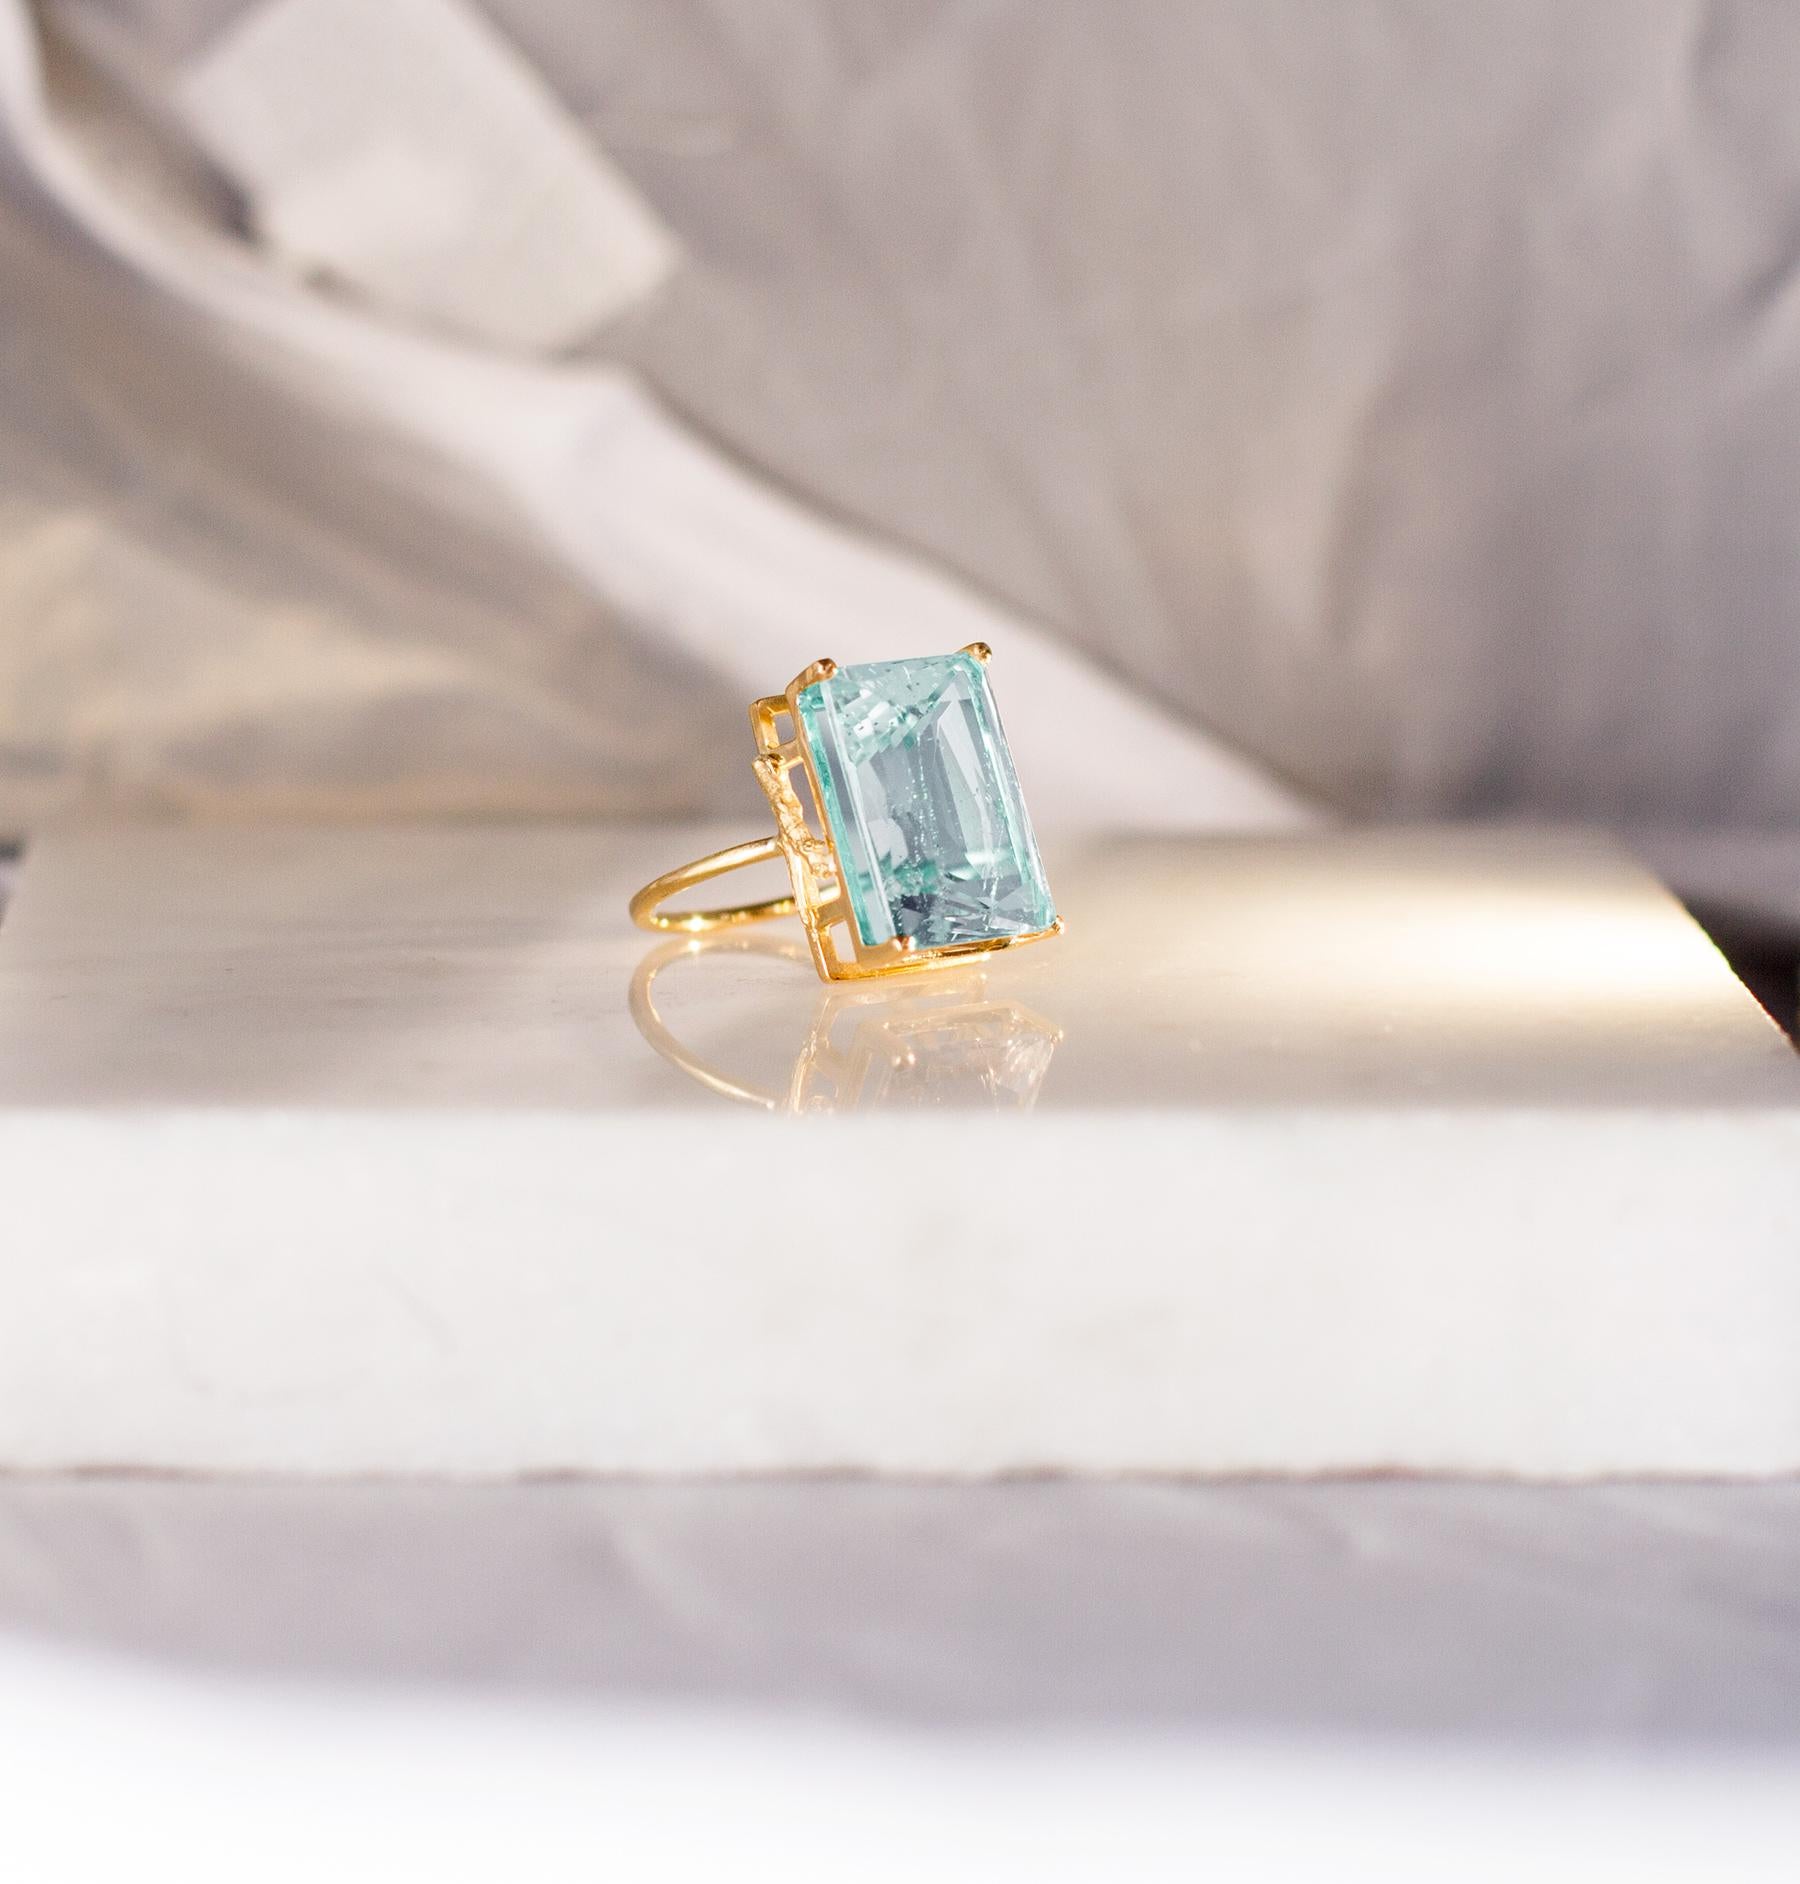 This engagement ring features a neon copper bearing Paraiba tourmaline (oval or cushion cut) set in 18 karat yellow gold. The exquisite neon color of the gem catches the eye and is accentuated by the fine jewelry work of tiny prongs. This ring can